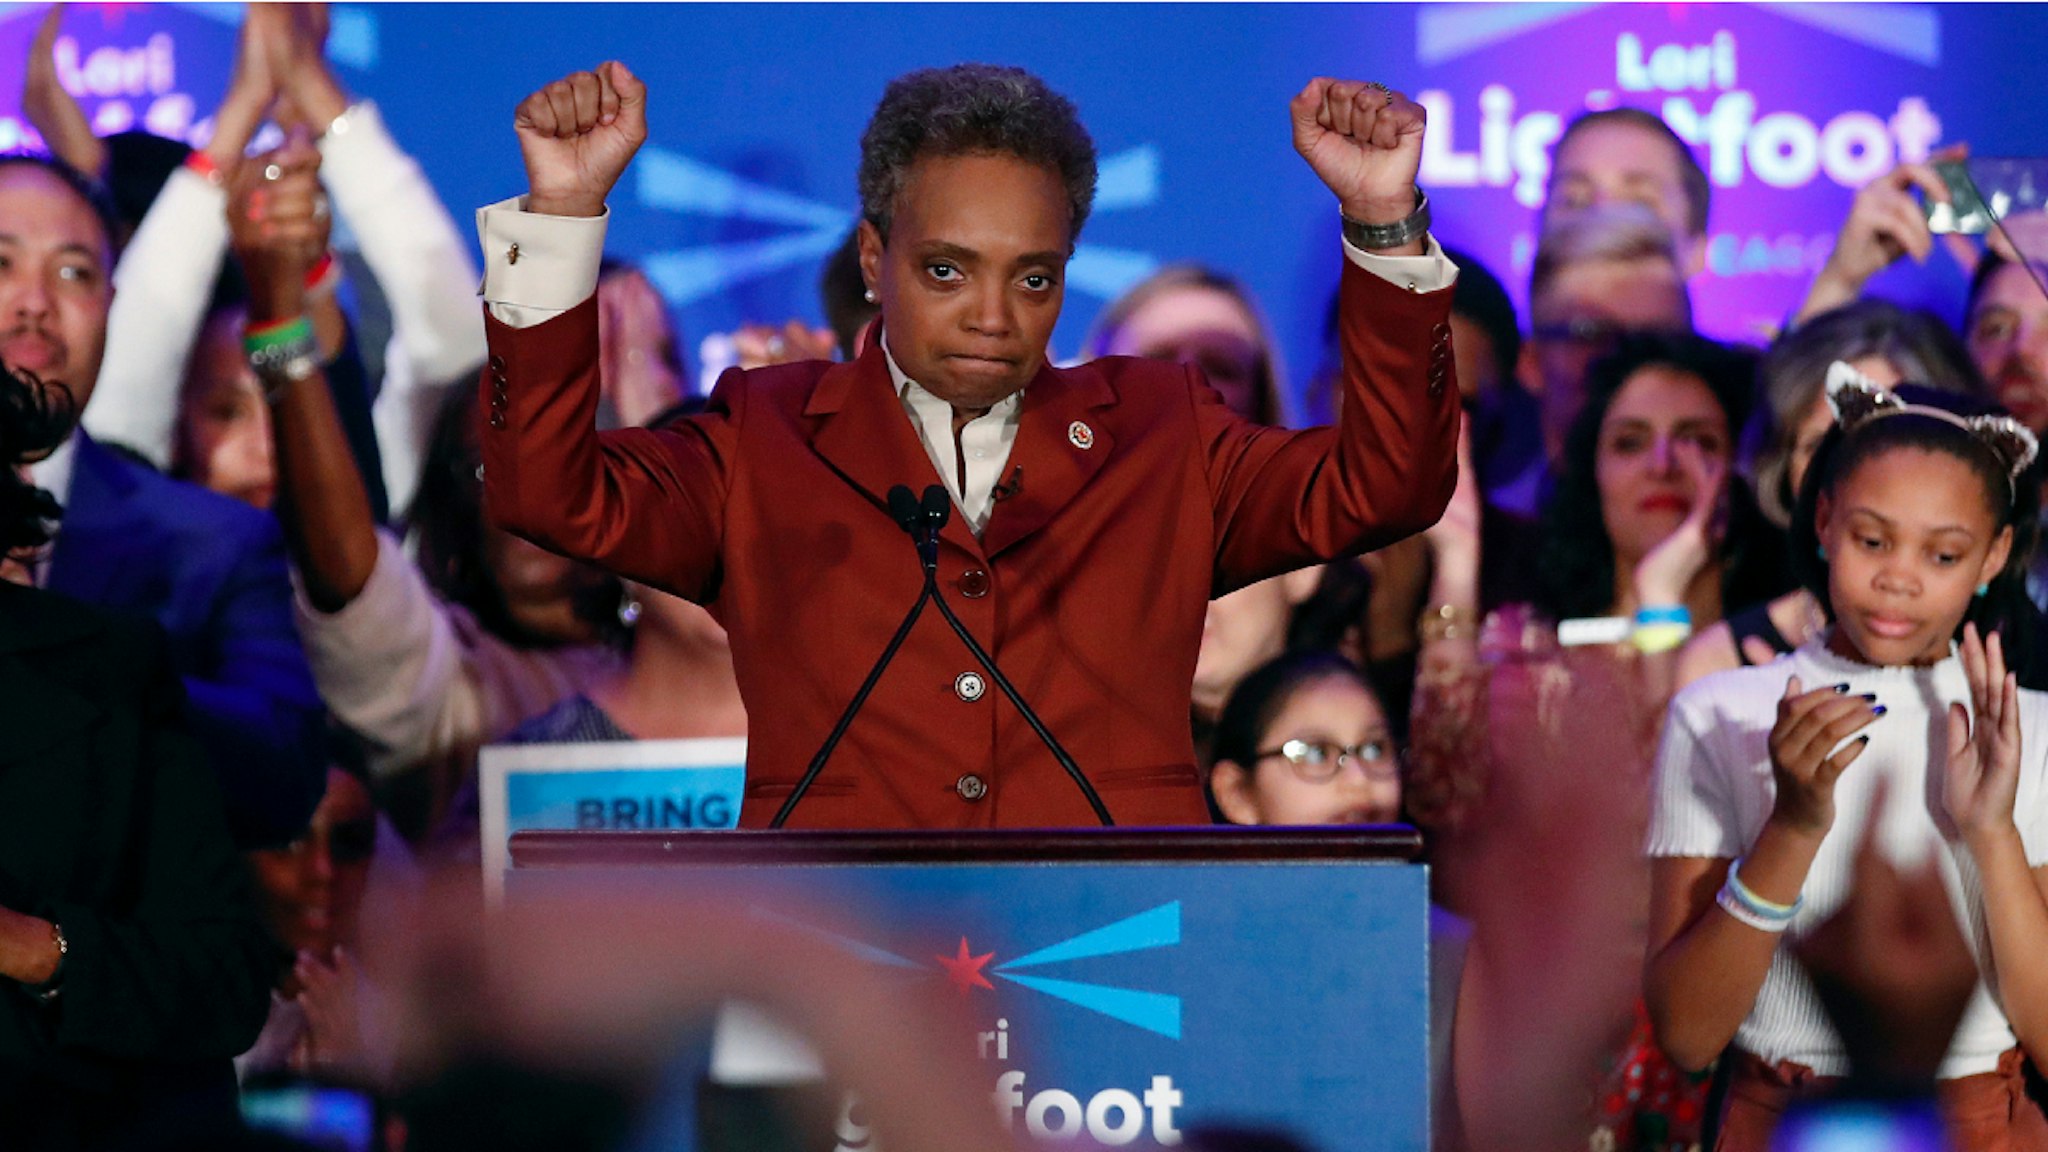 TOPSHOT - Chicago mayor elect Lori Lightfoot speaks during the election night party in Chicago, Illinois on April 2, 2019.